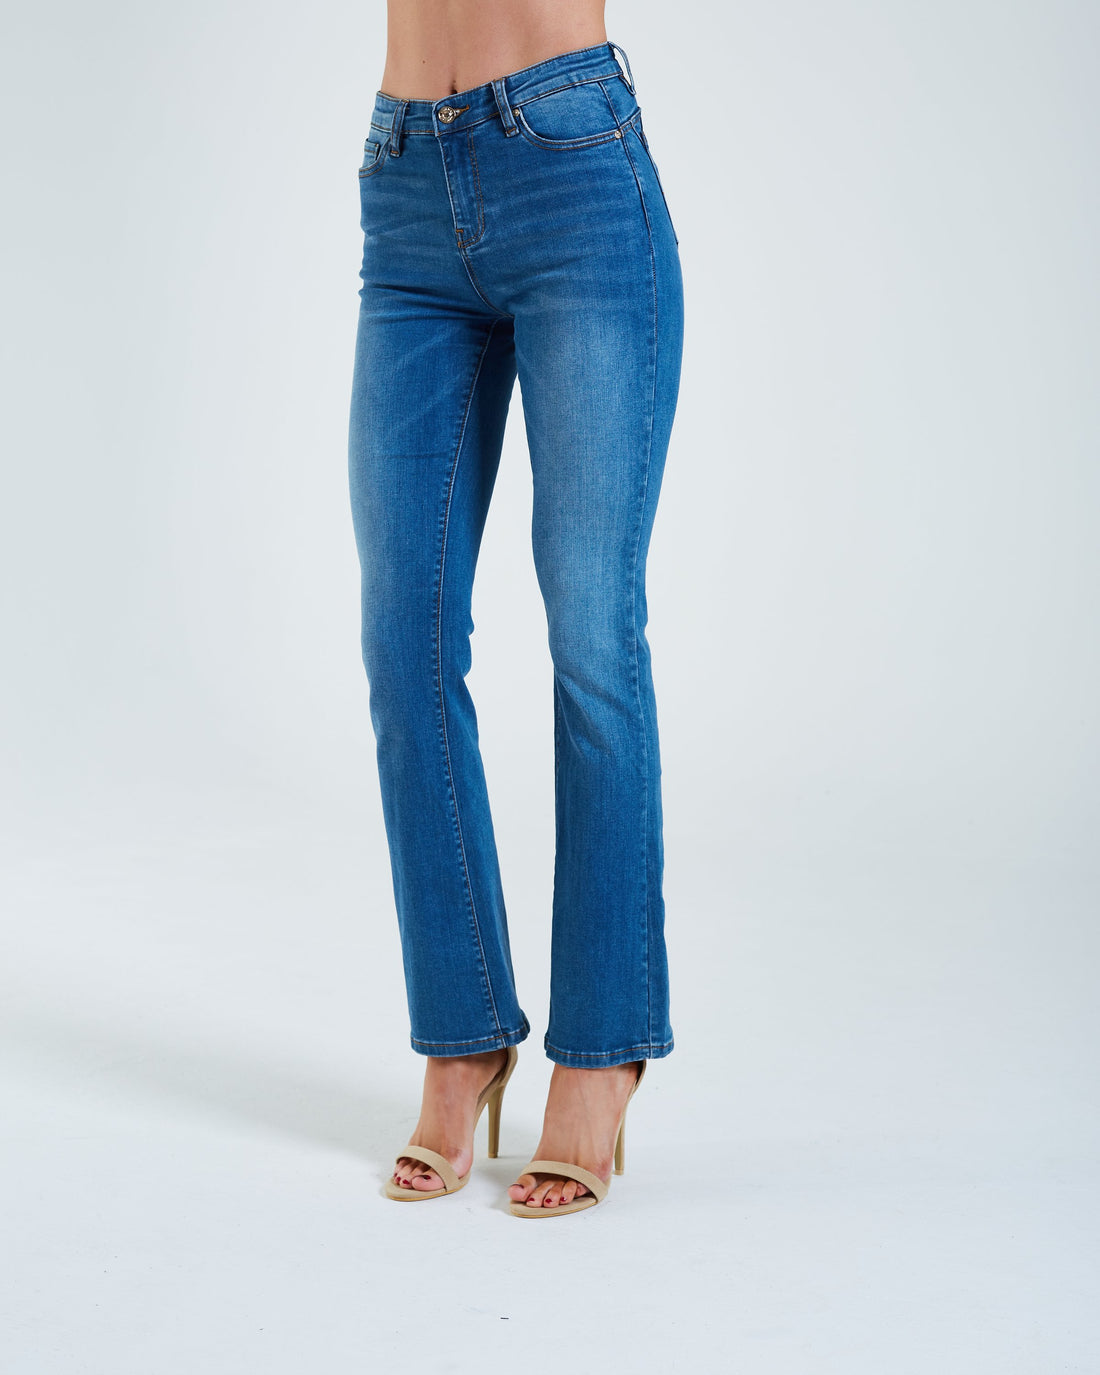 Ladies Gina High Rise Bootleg Jeans - Medium Blue Wash-Front View